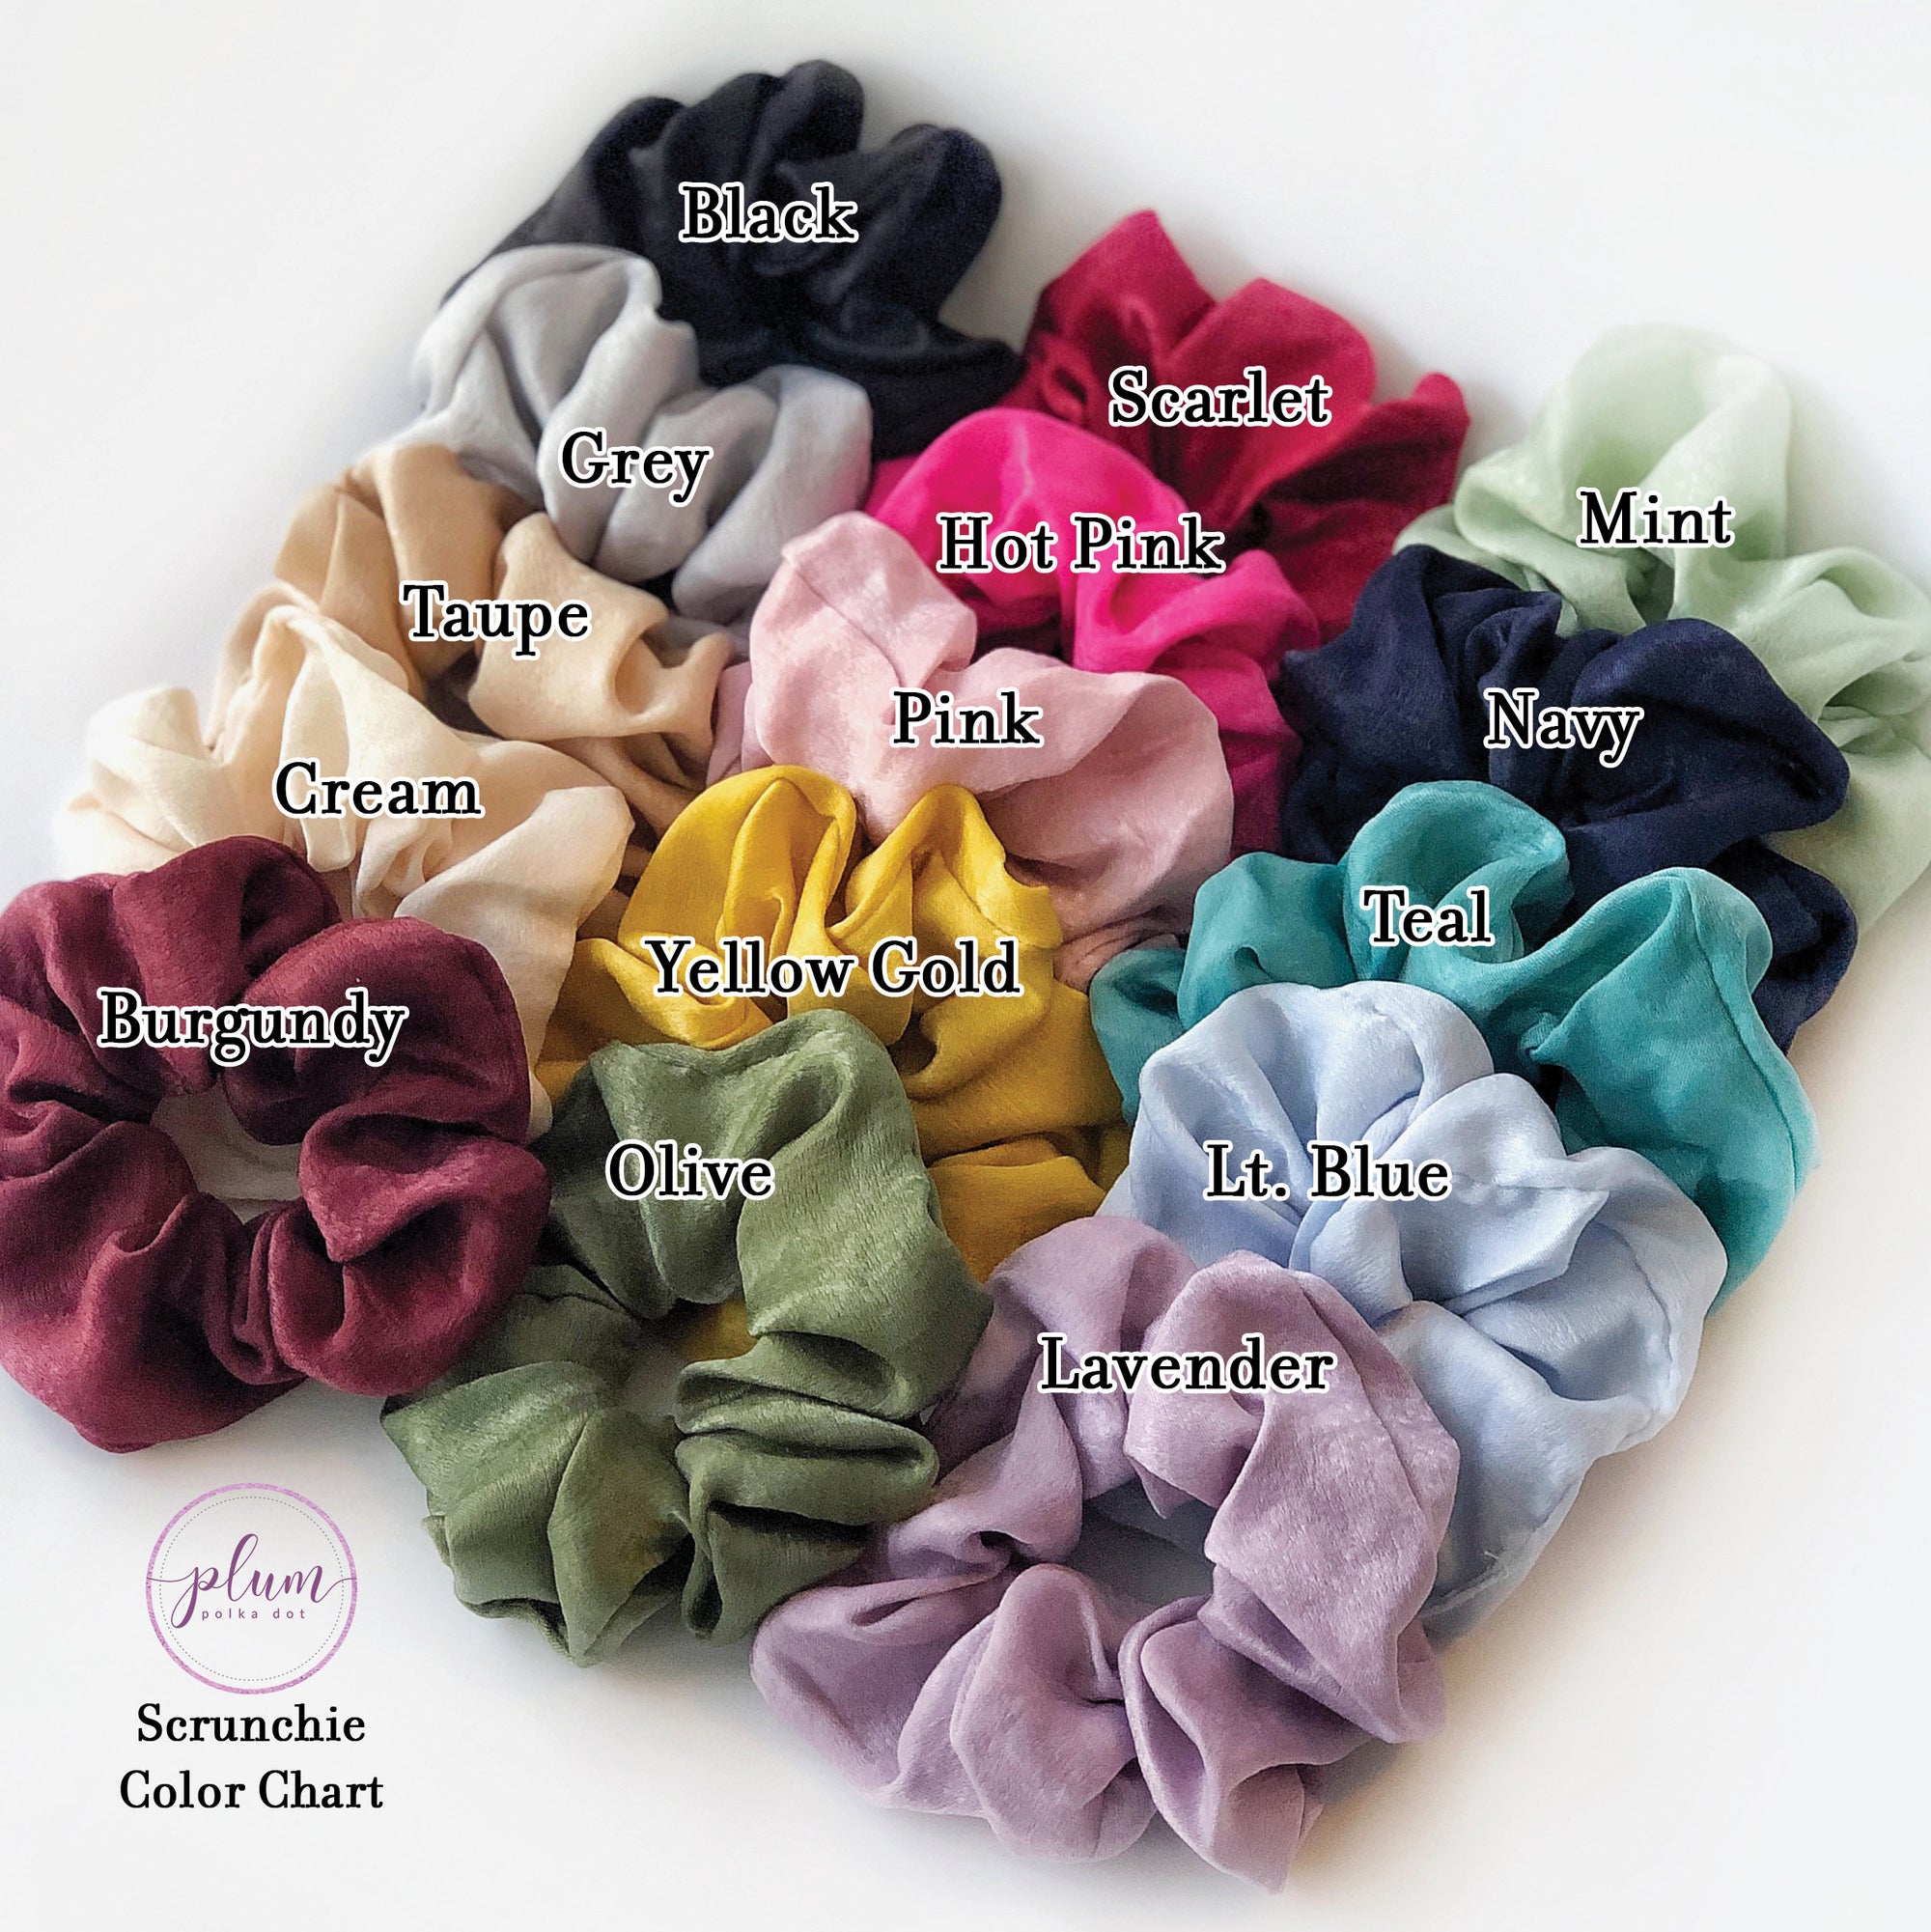 Hair Scrunchie Bachelorette Party Favors, Ain&#39;t No Party Like a Bachelorette Party, Bachelorette Favor, To Have And To Hold Your Hair Back